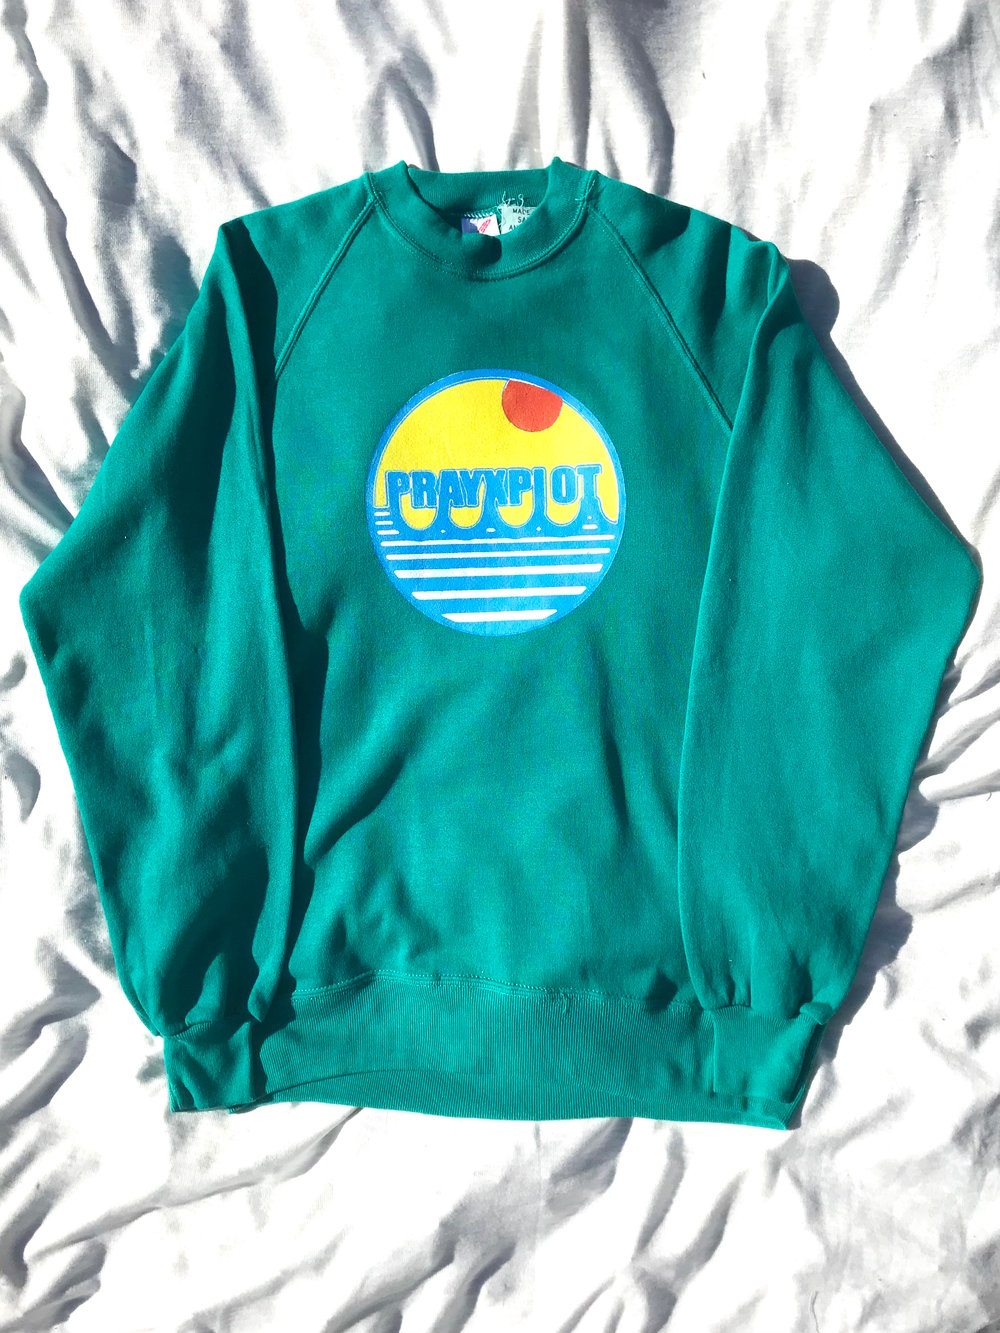 that port vintage sweater in teal